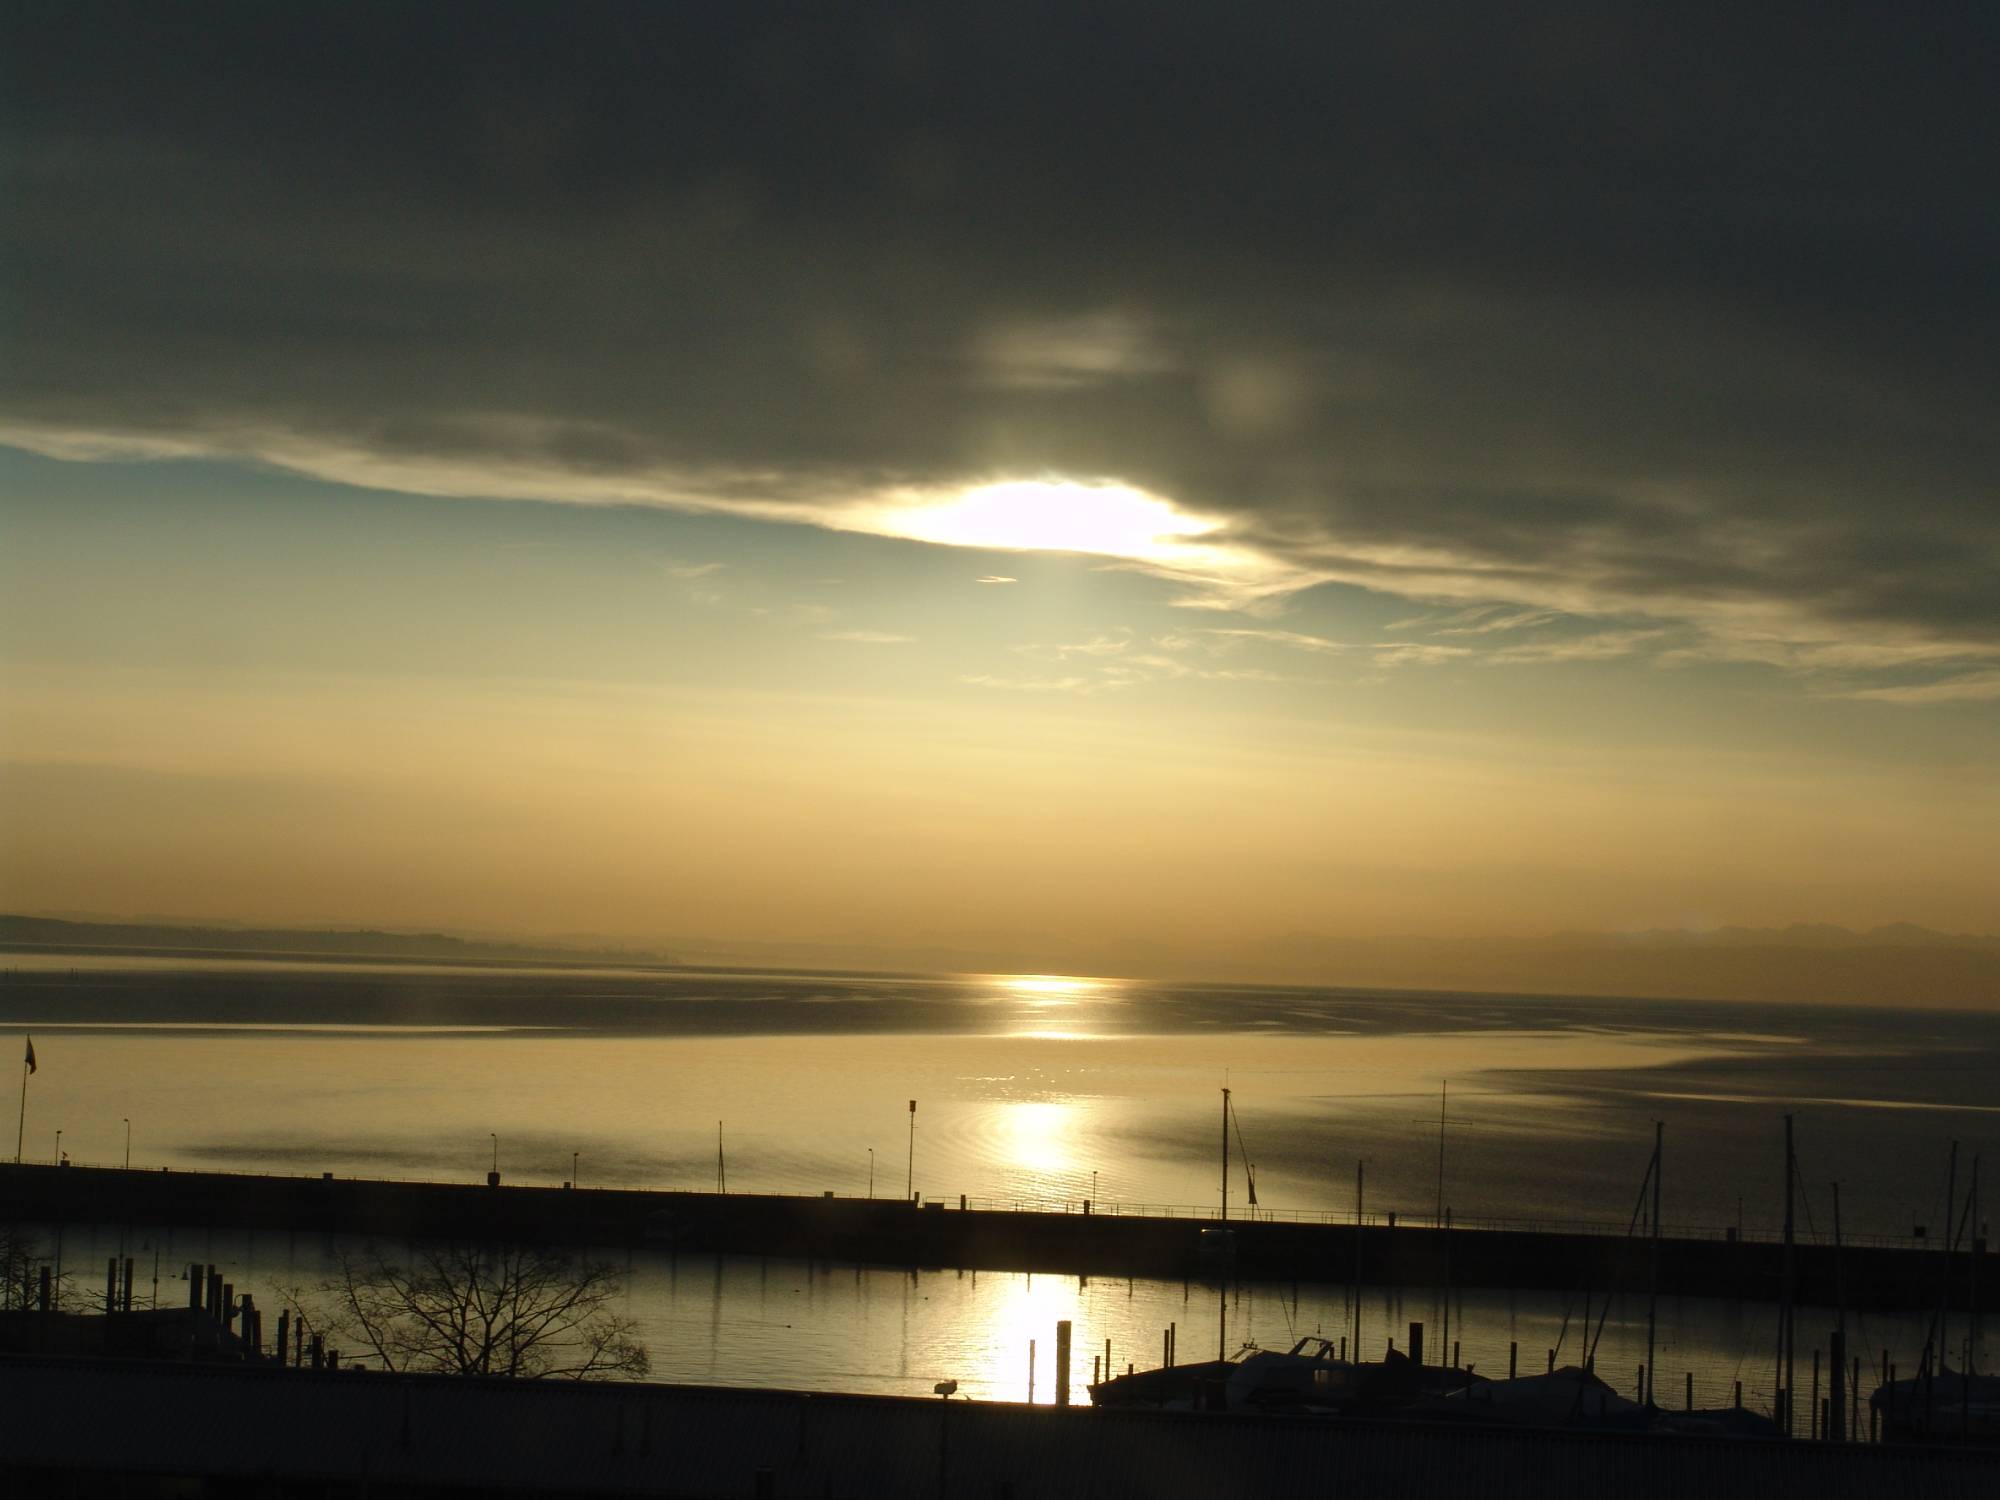 Lake Bodensee - Sunset over Konstanz